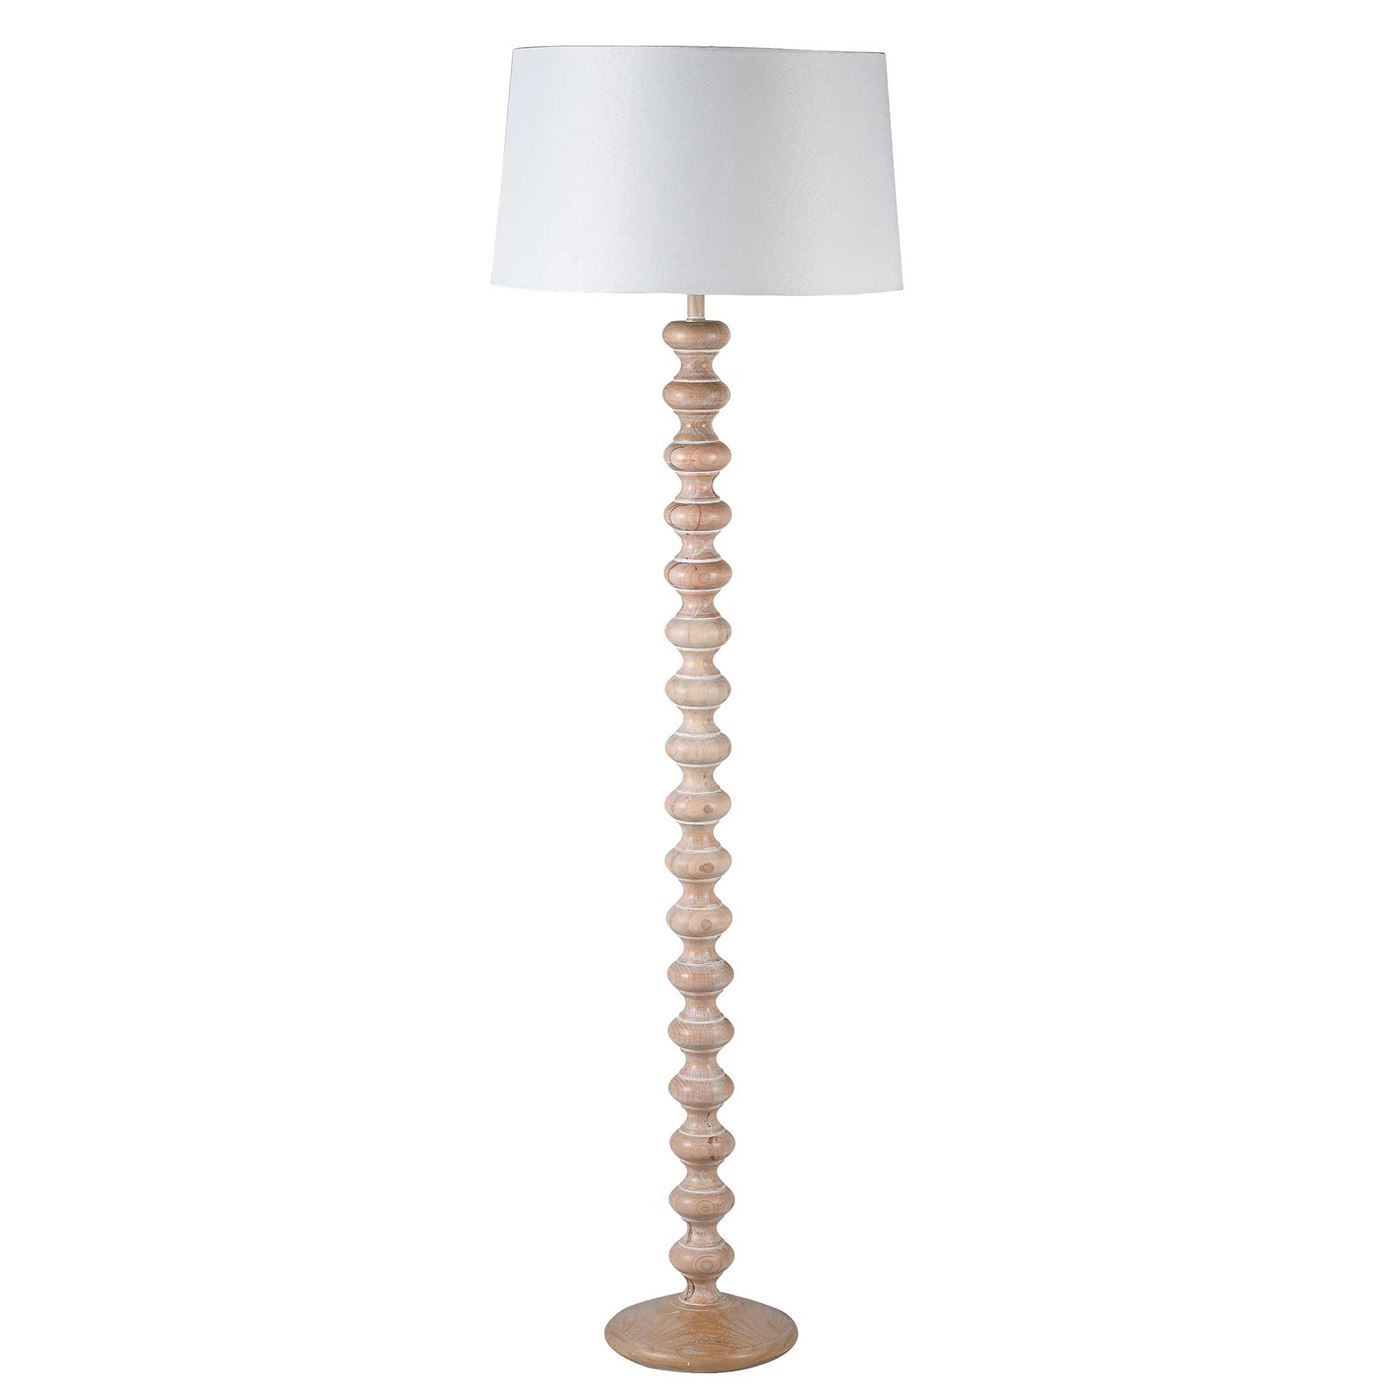 Sculpted Wood Floor Lamp, Neutral - Barker & Stonehouse - image 1